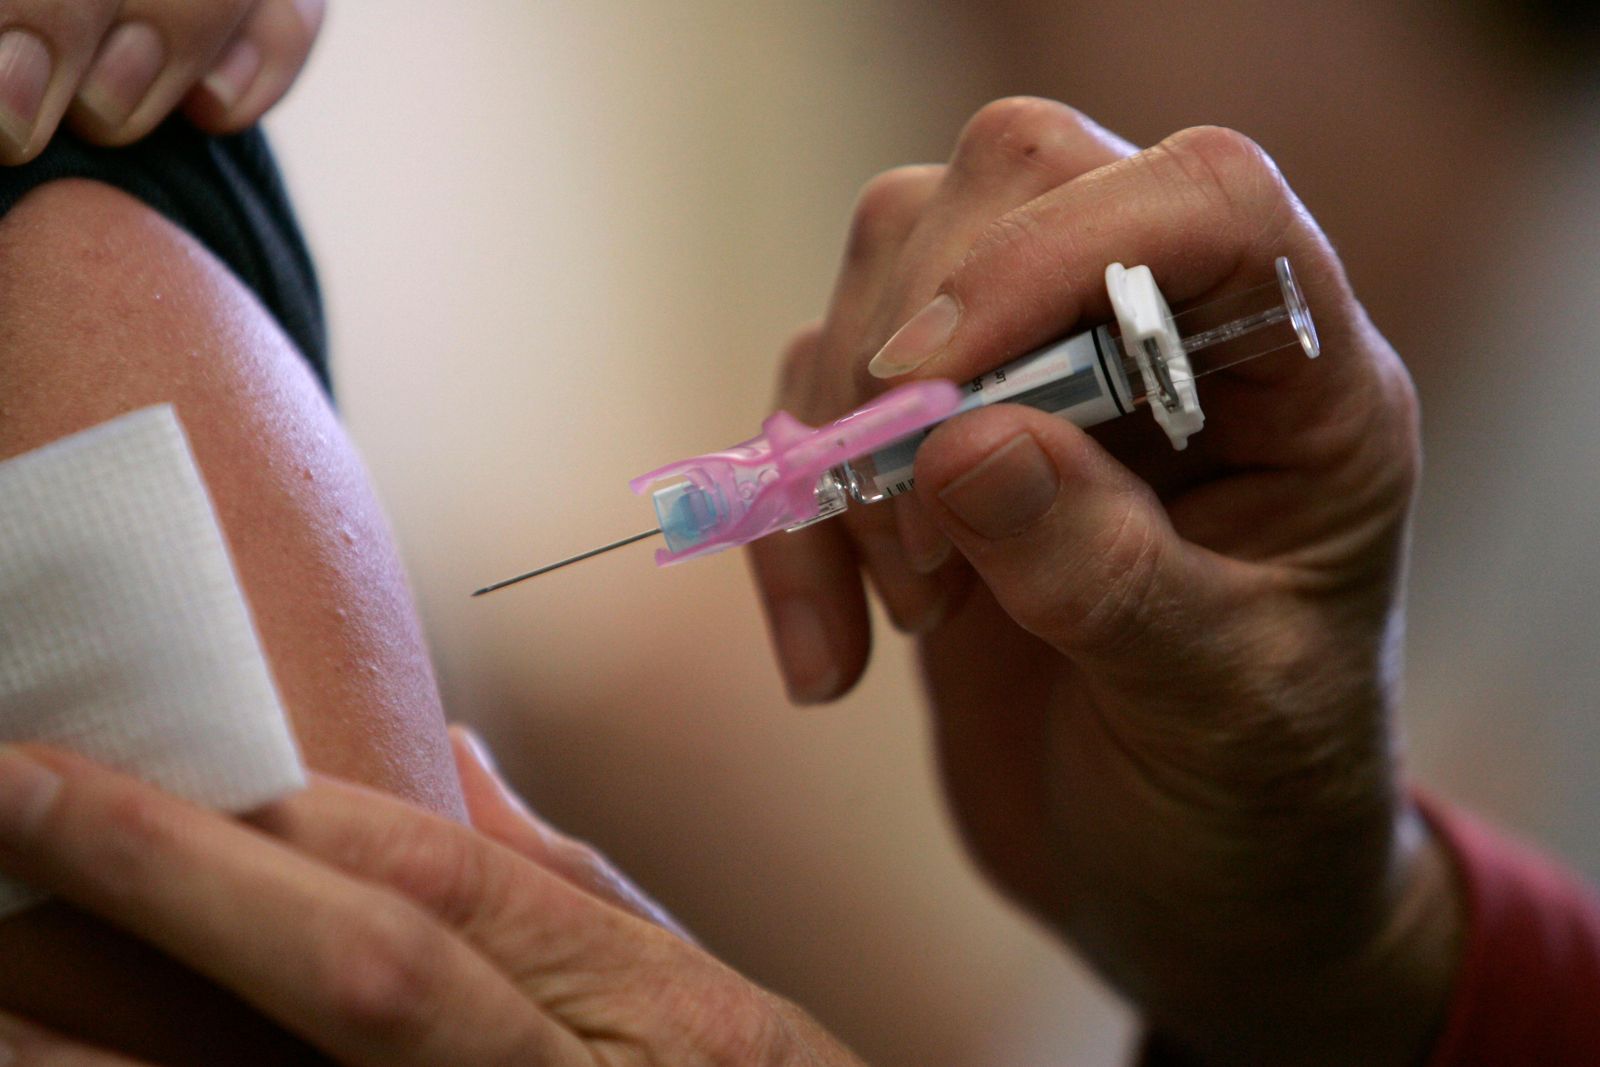 A Needle Could Make For Pain-Free Flu Shots | Innovation